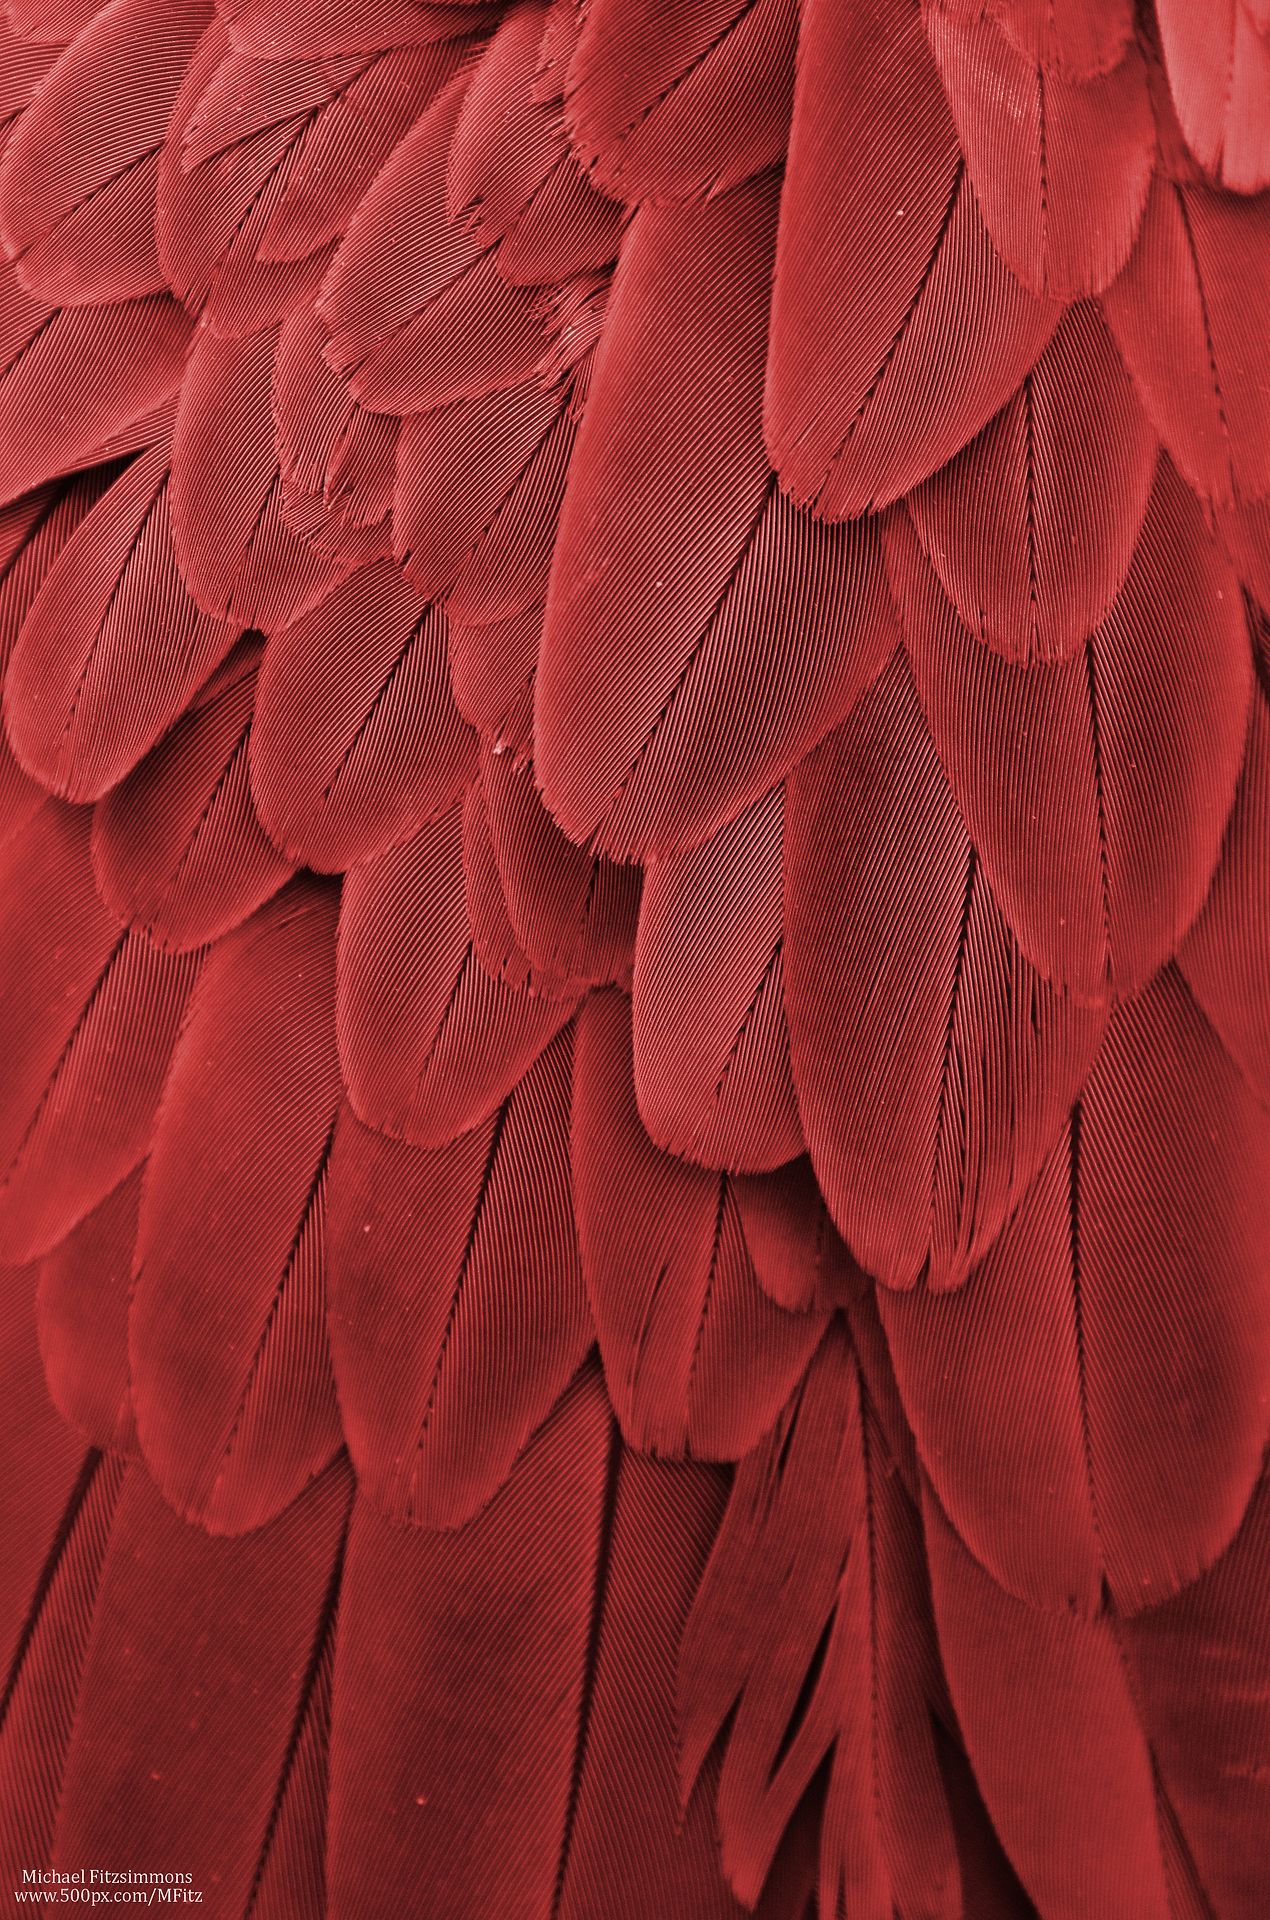 proofofevidence:As blood red jam. “Macaw Feathers XXII”. Photo by ...